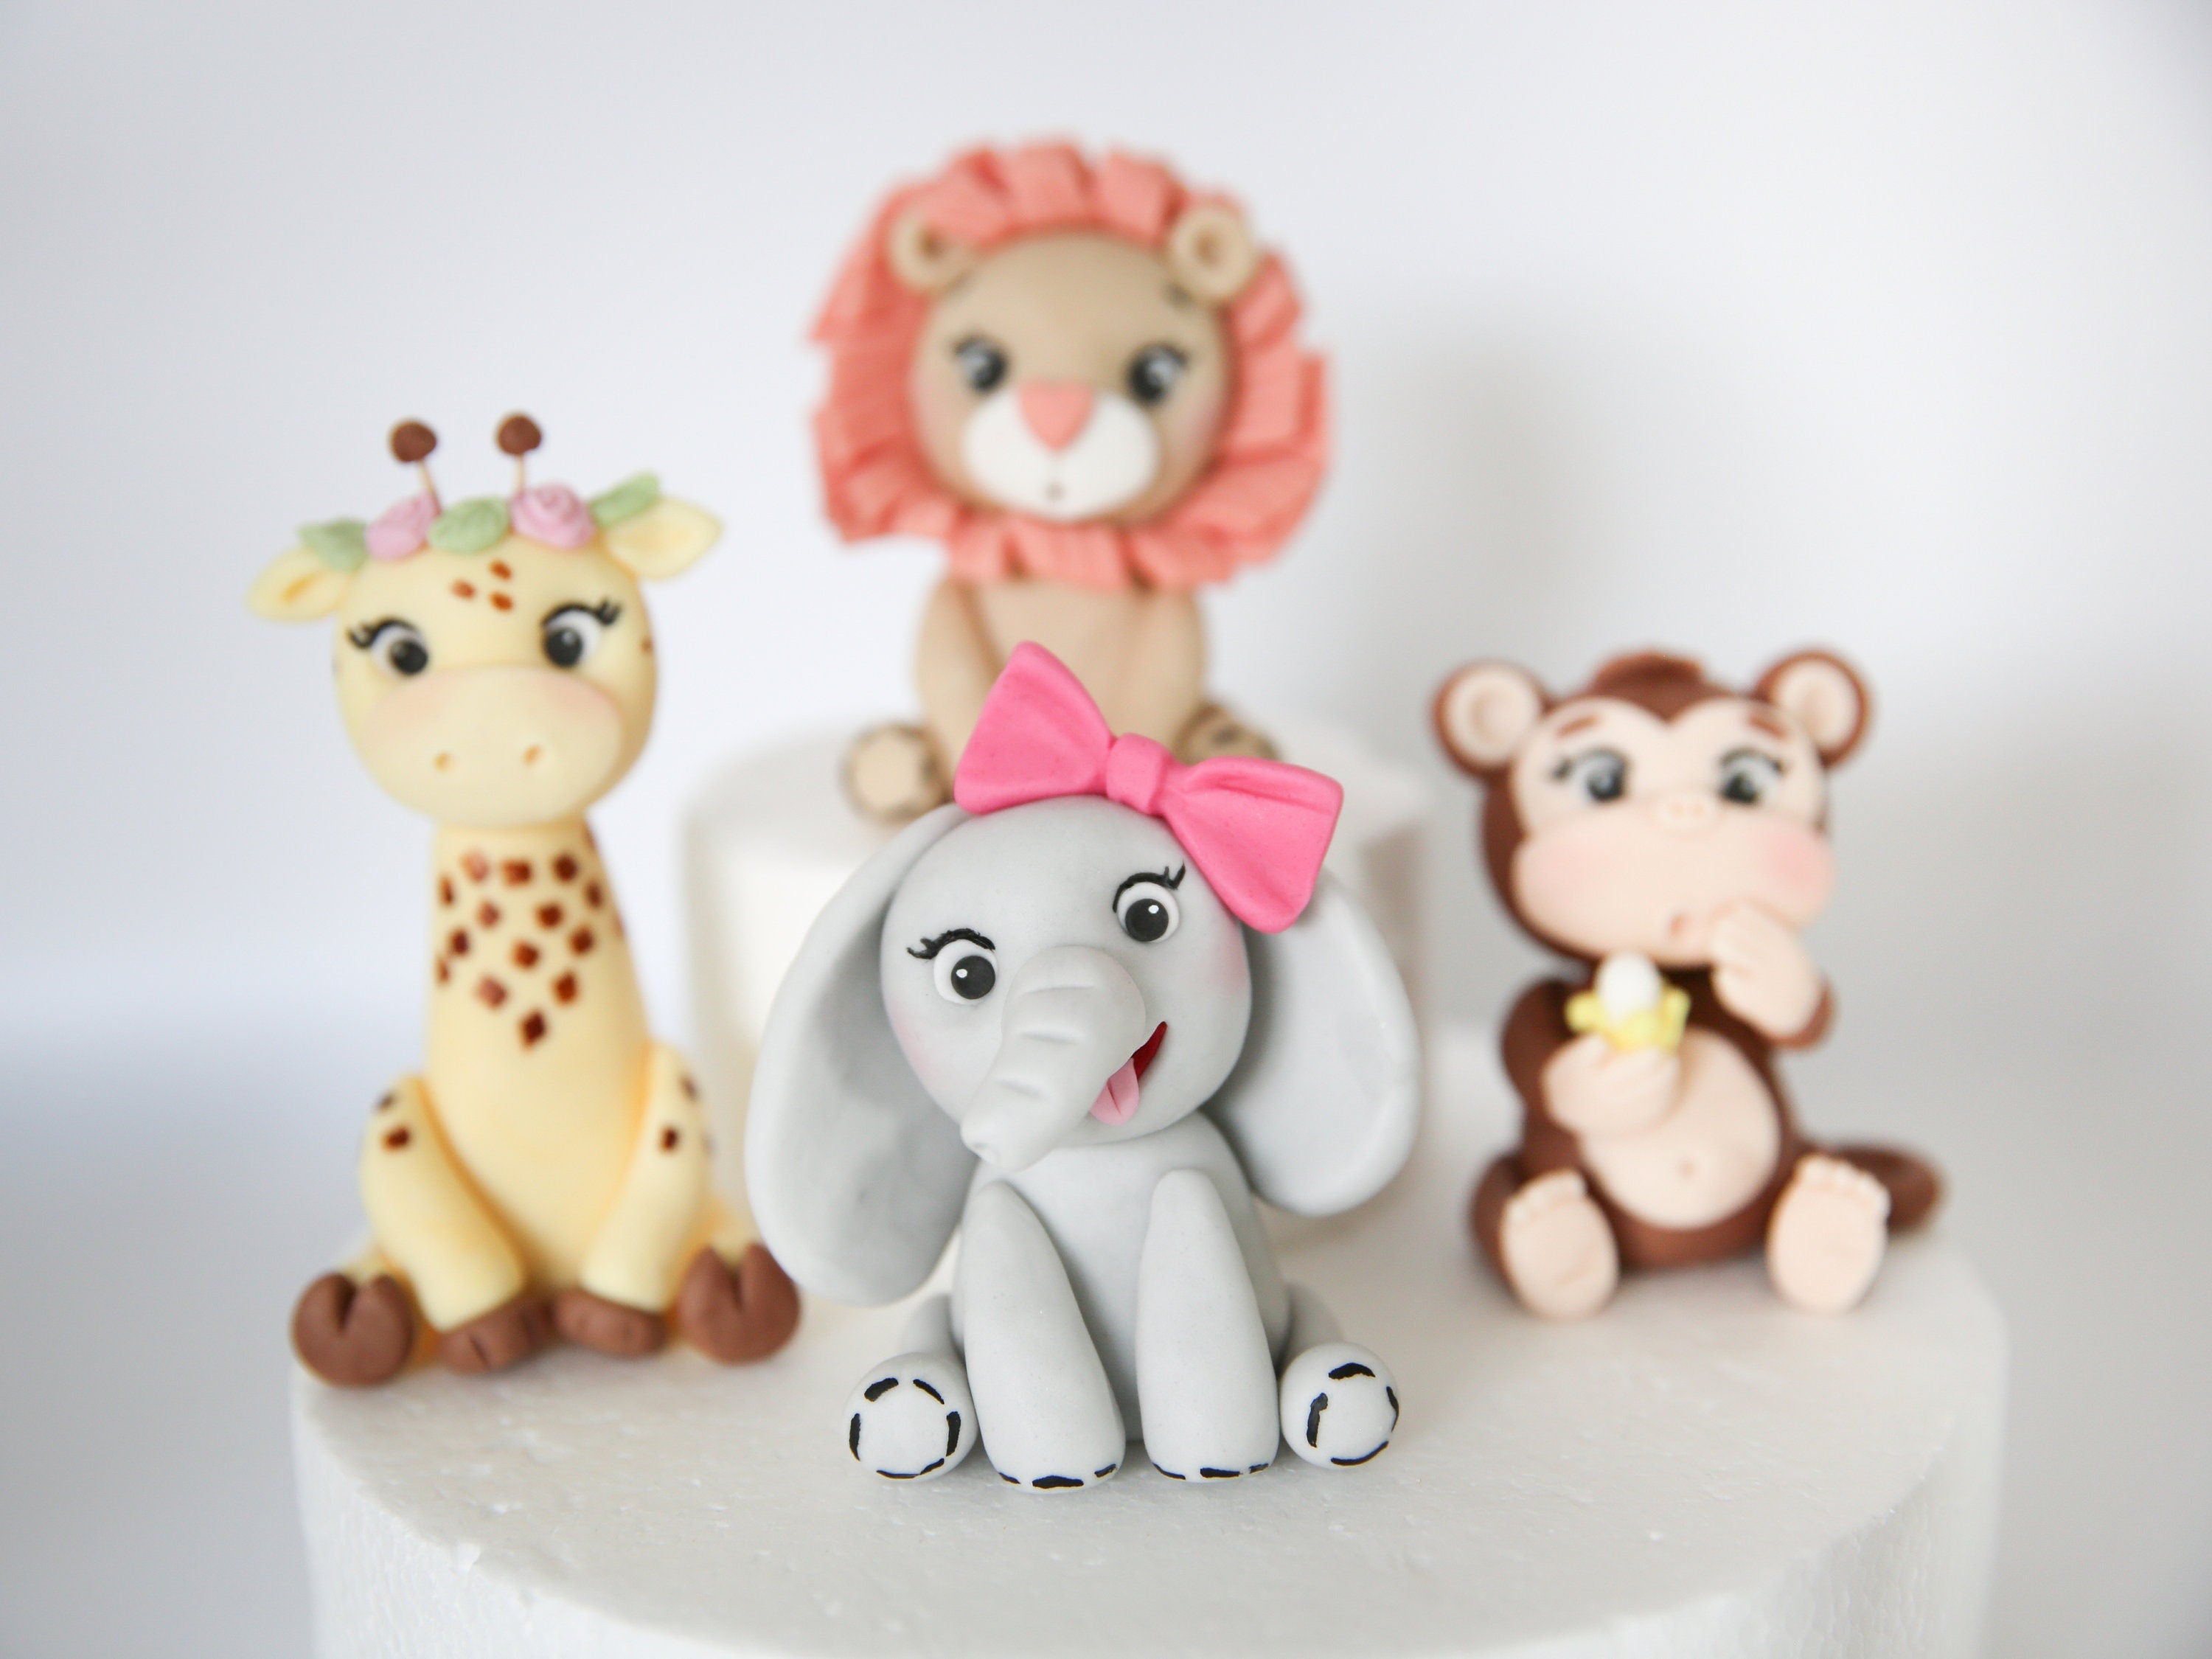 Discover 147+ images of cake toppers